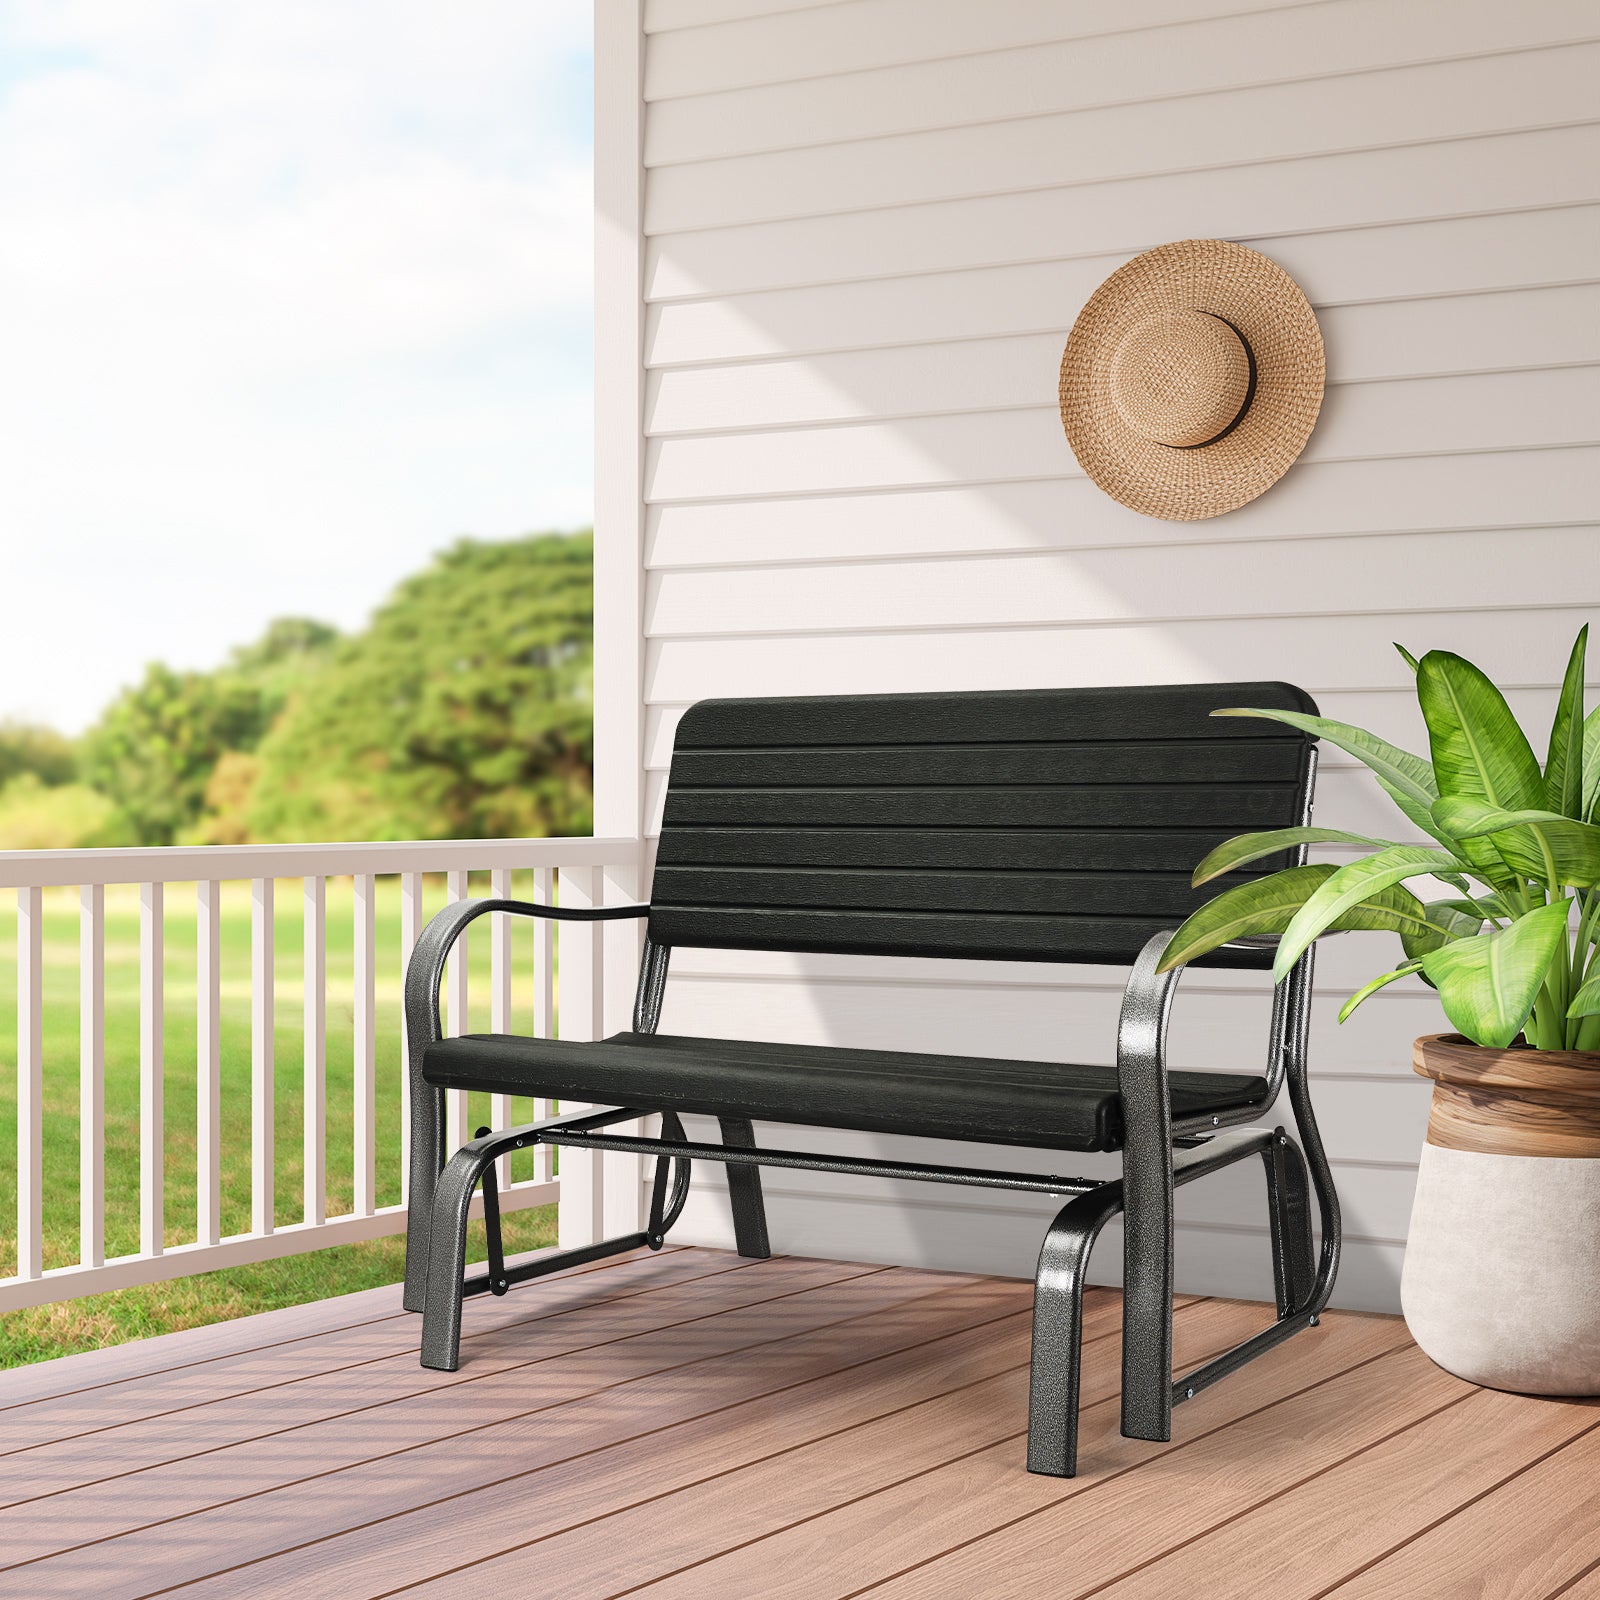 2 Seater Garden Bench with Ergonomic Backrest and Armrests